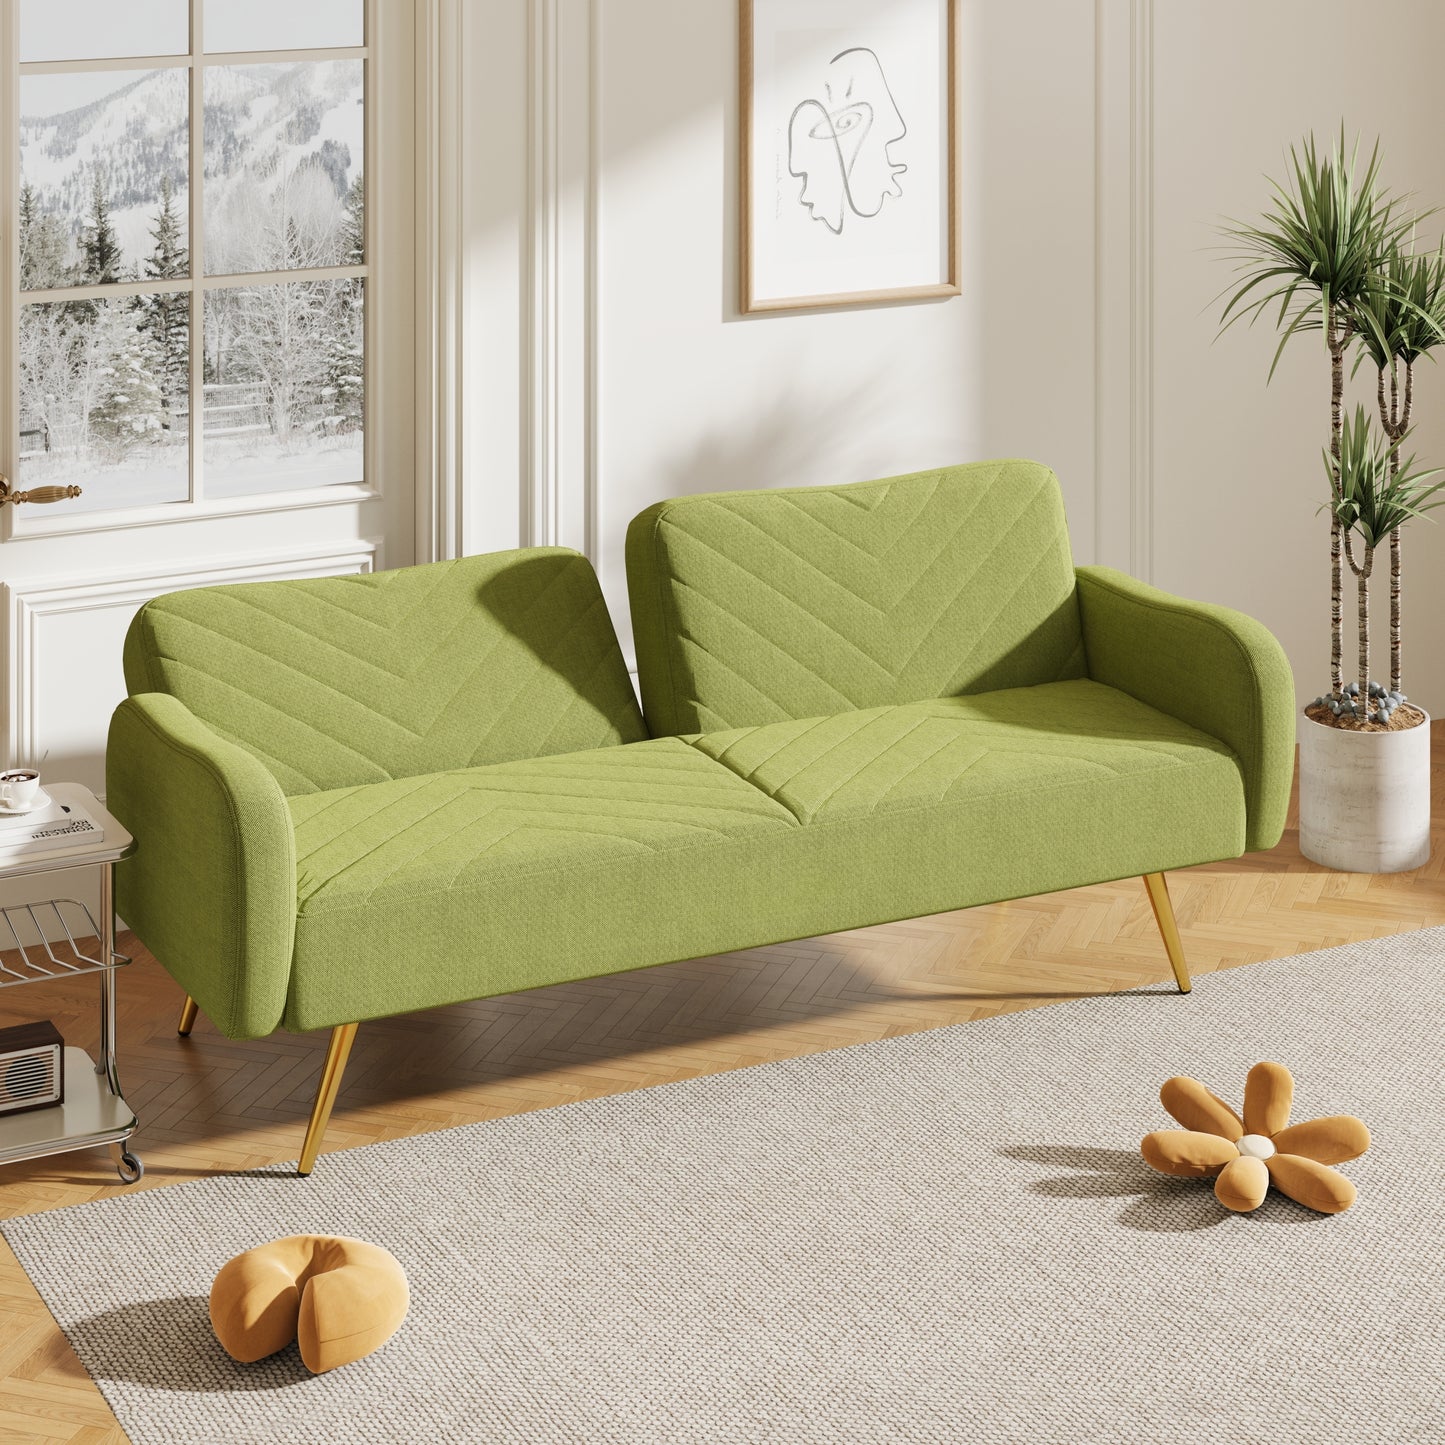 Green Fabric Double Sofa with Split Backrest and Two Throw Pillows - Enova Luxe Home Store